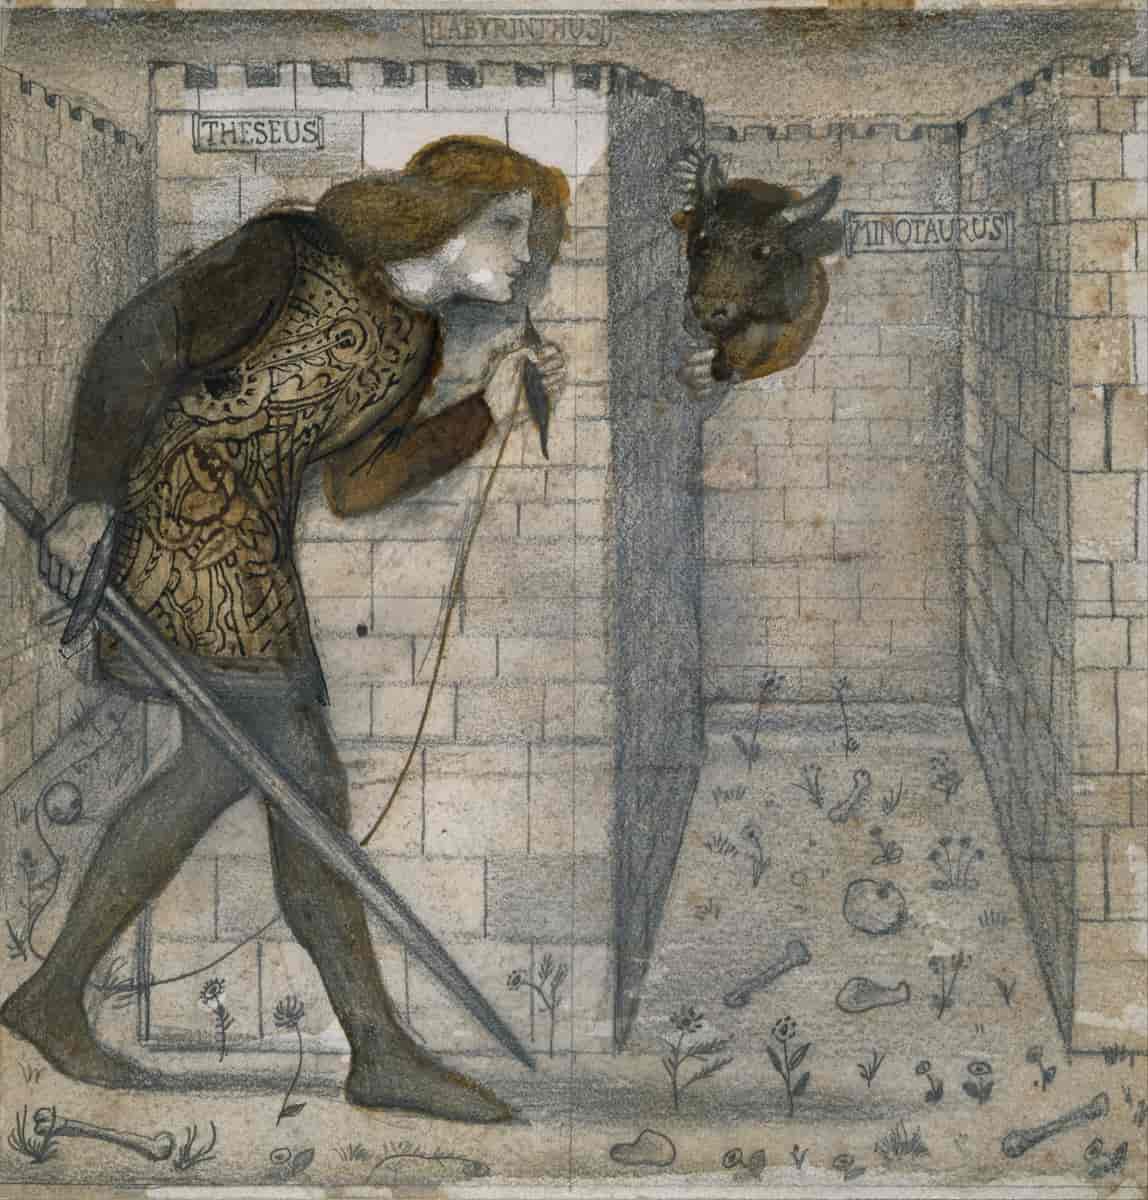 Tile Design - Theseus and the Minotaur in the Labyrinth